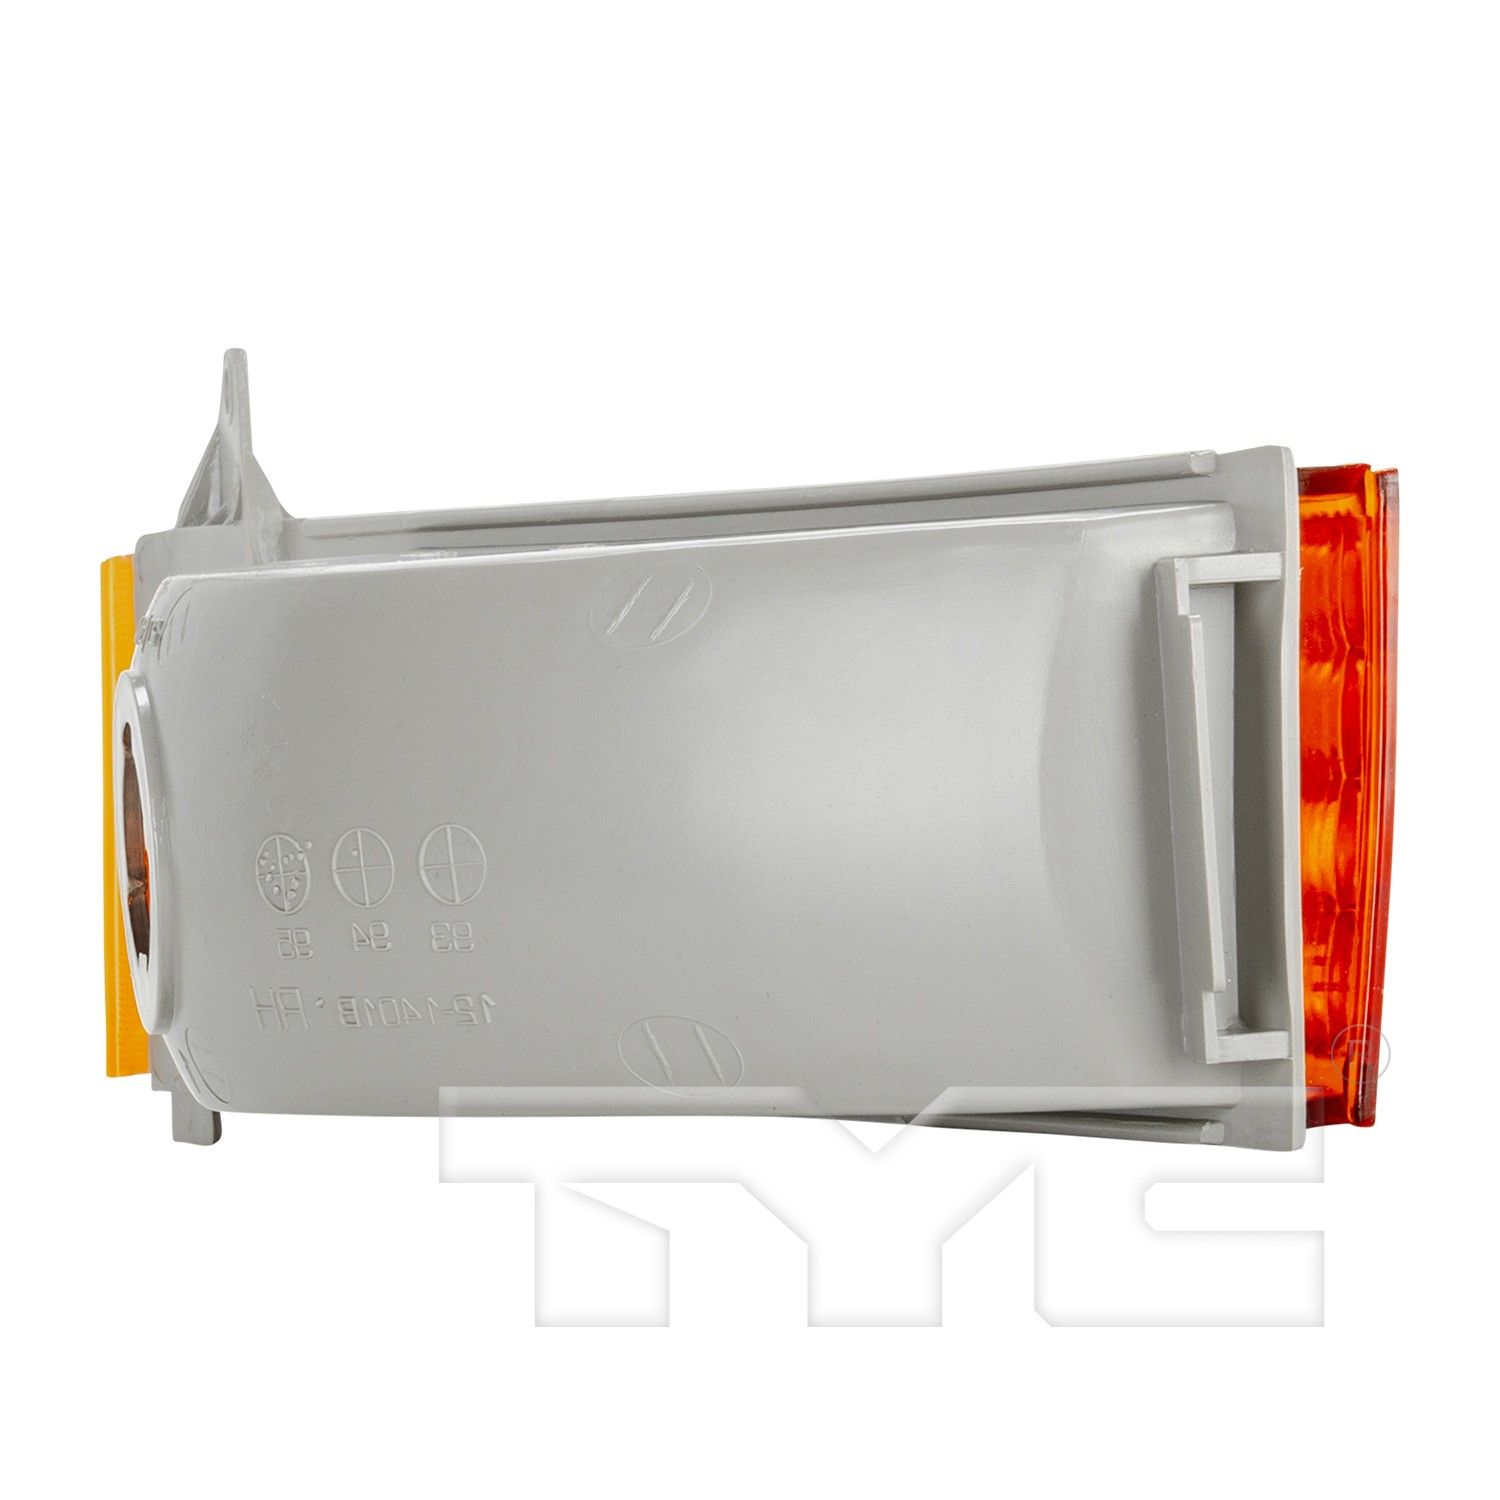 TYC 12-1402-01 Parking Light for Ford Bronco Fits 1991 Ford Ranger - image 1 of 4